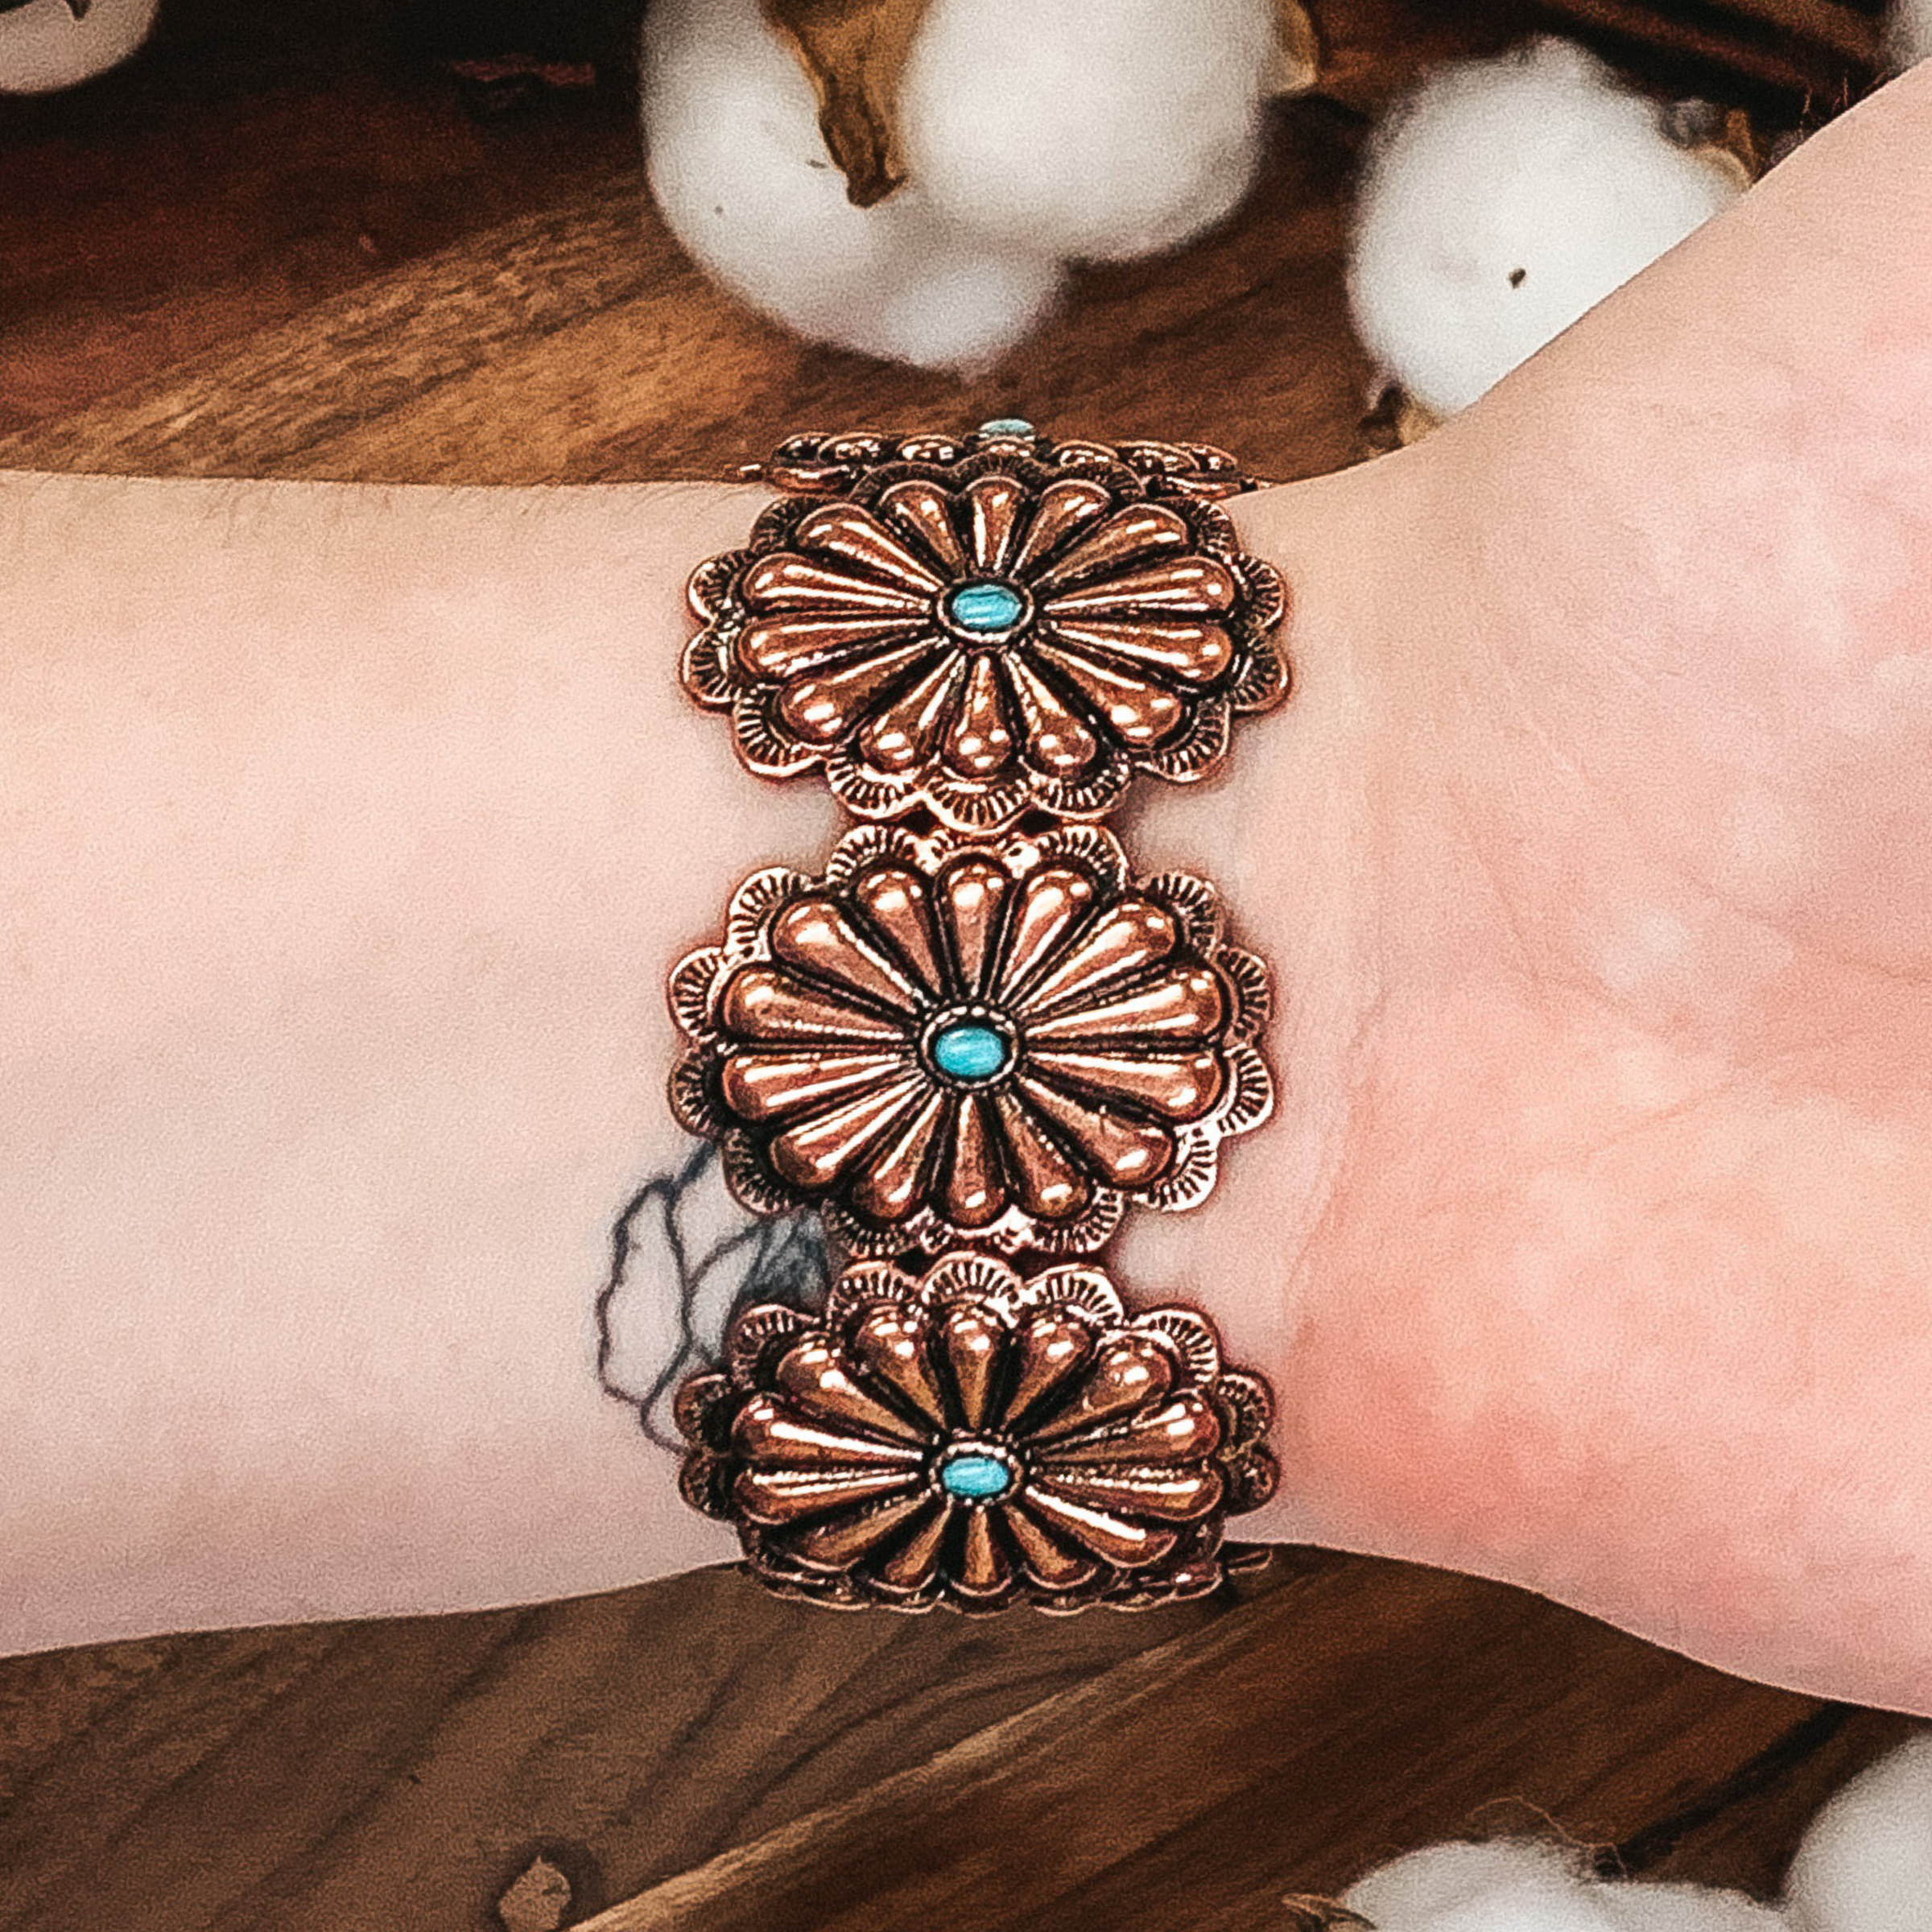 Copper Tone Concho Bracelet with Turquoise Center Stone - Giddy Up Glamour Boutique